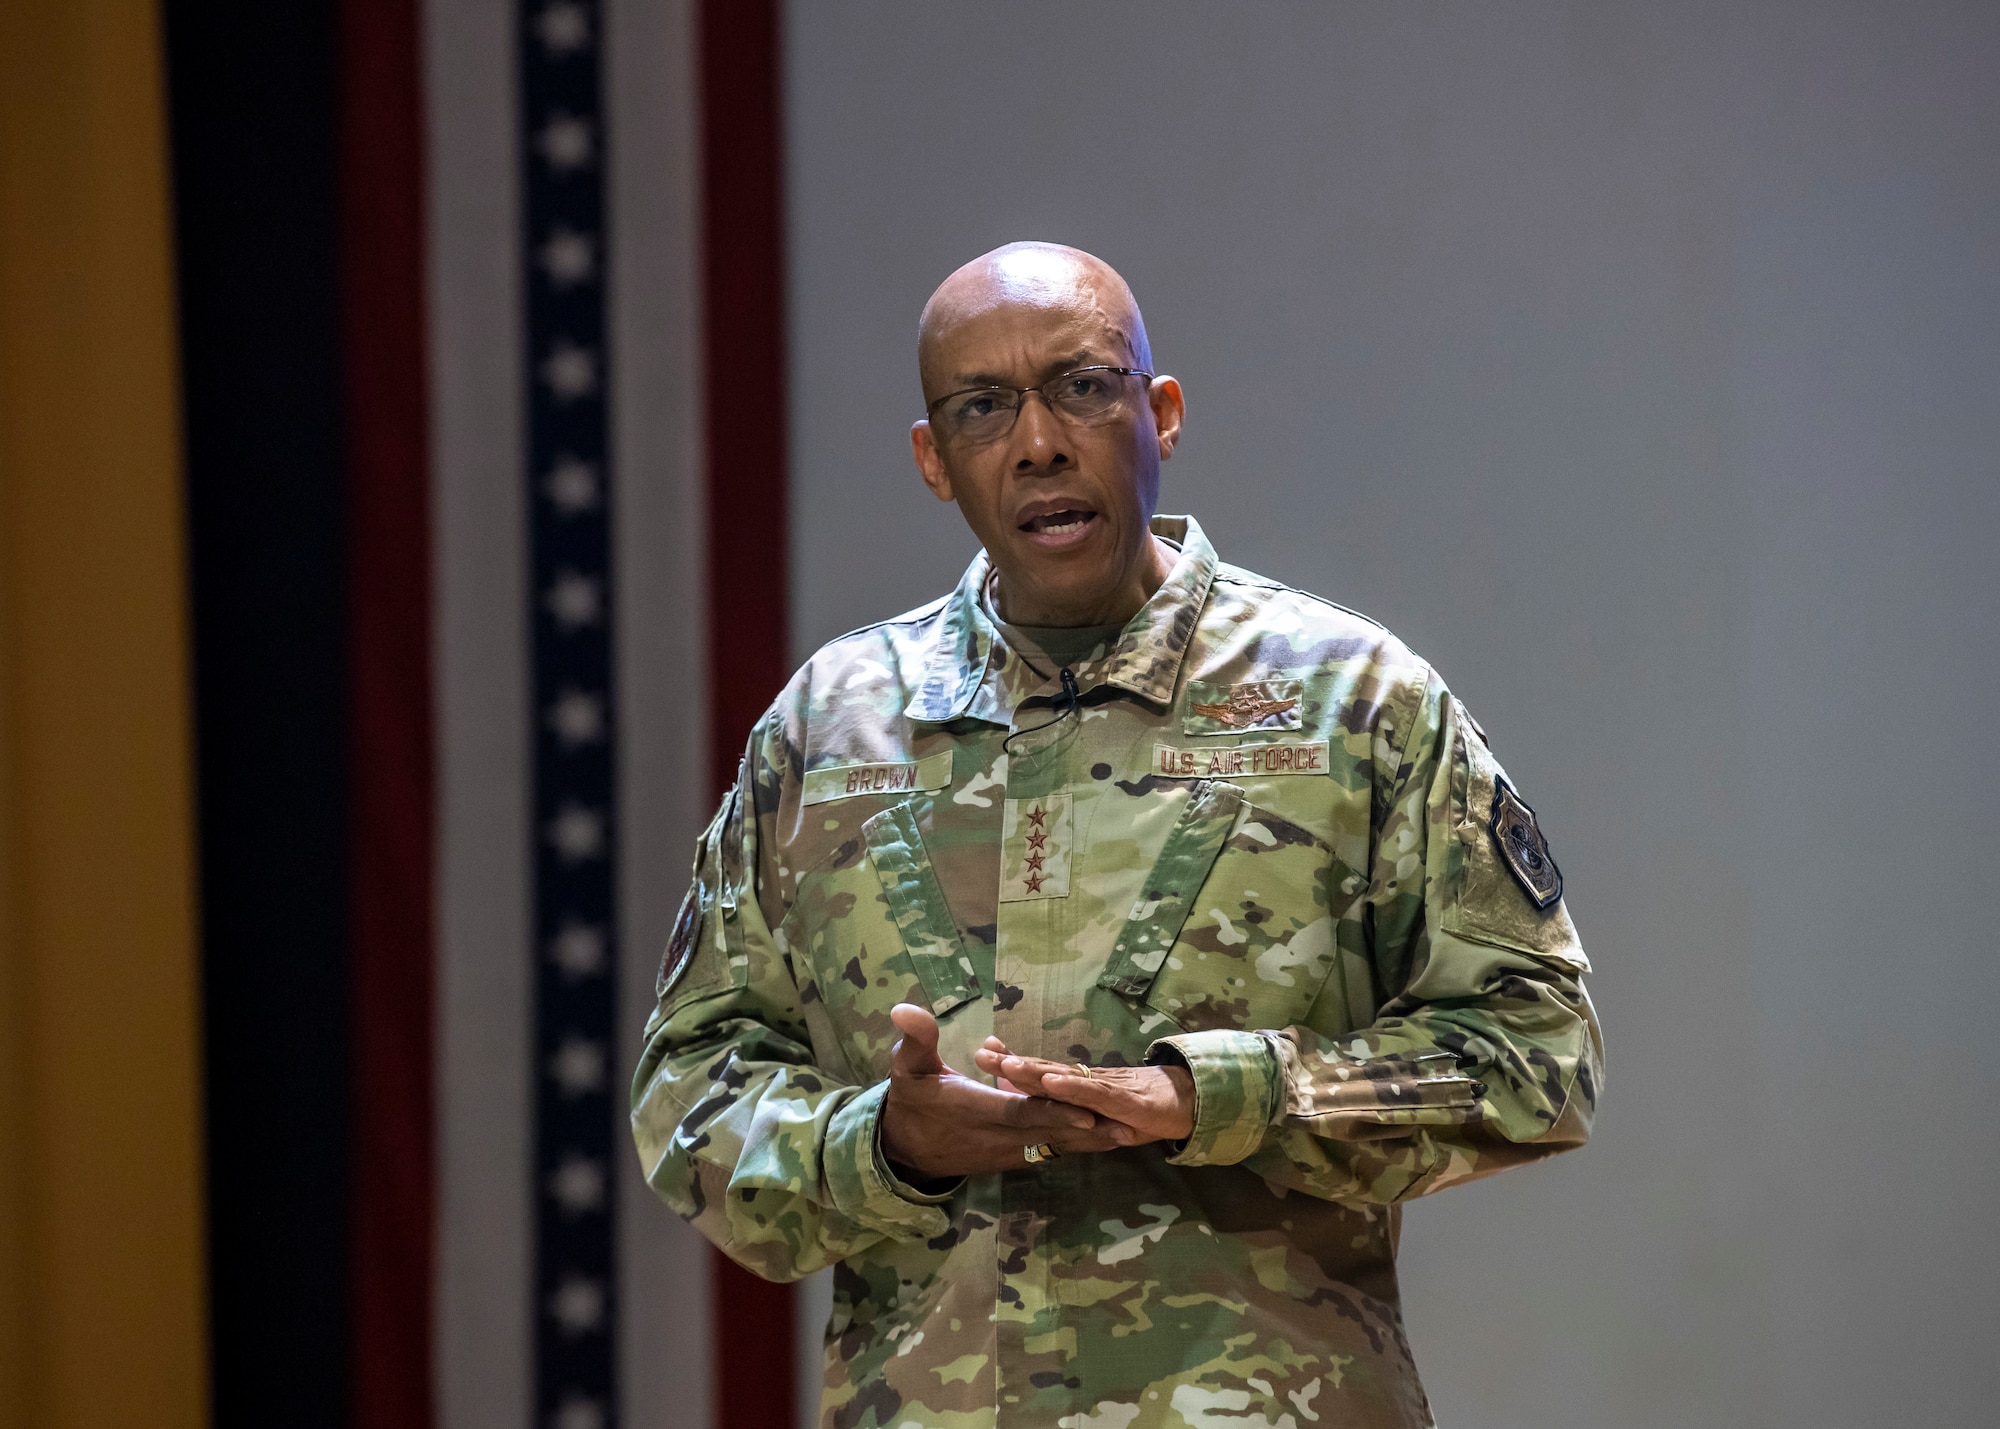 Chief of Staff of the Air Force, Gen. Charles Q. Brown Jr. addresses Team MacDill during an all call at MacDill Air Force Base, Florida, June 11, 2021.